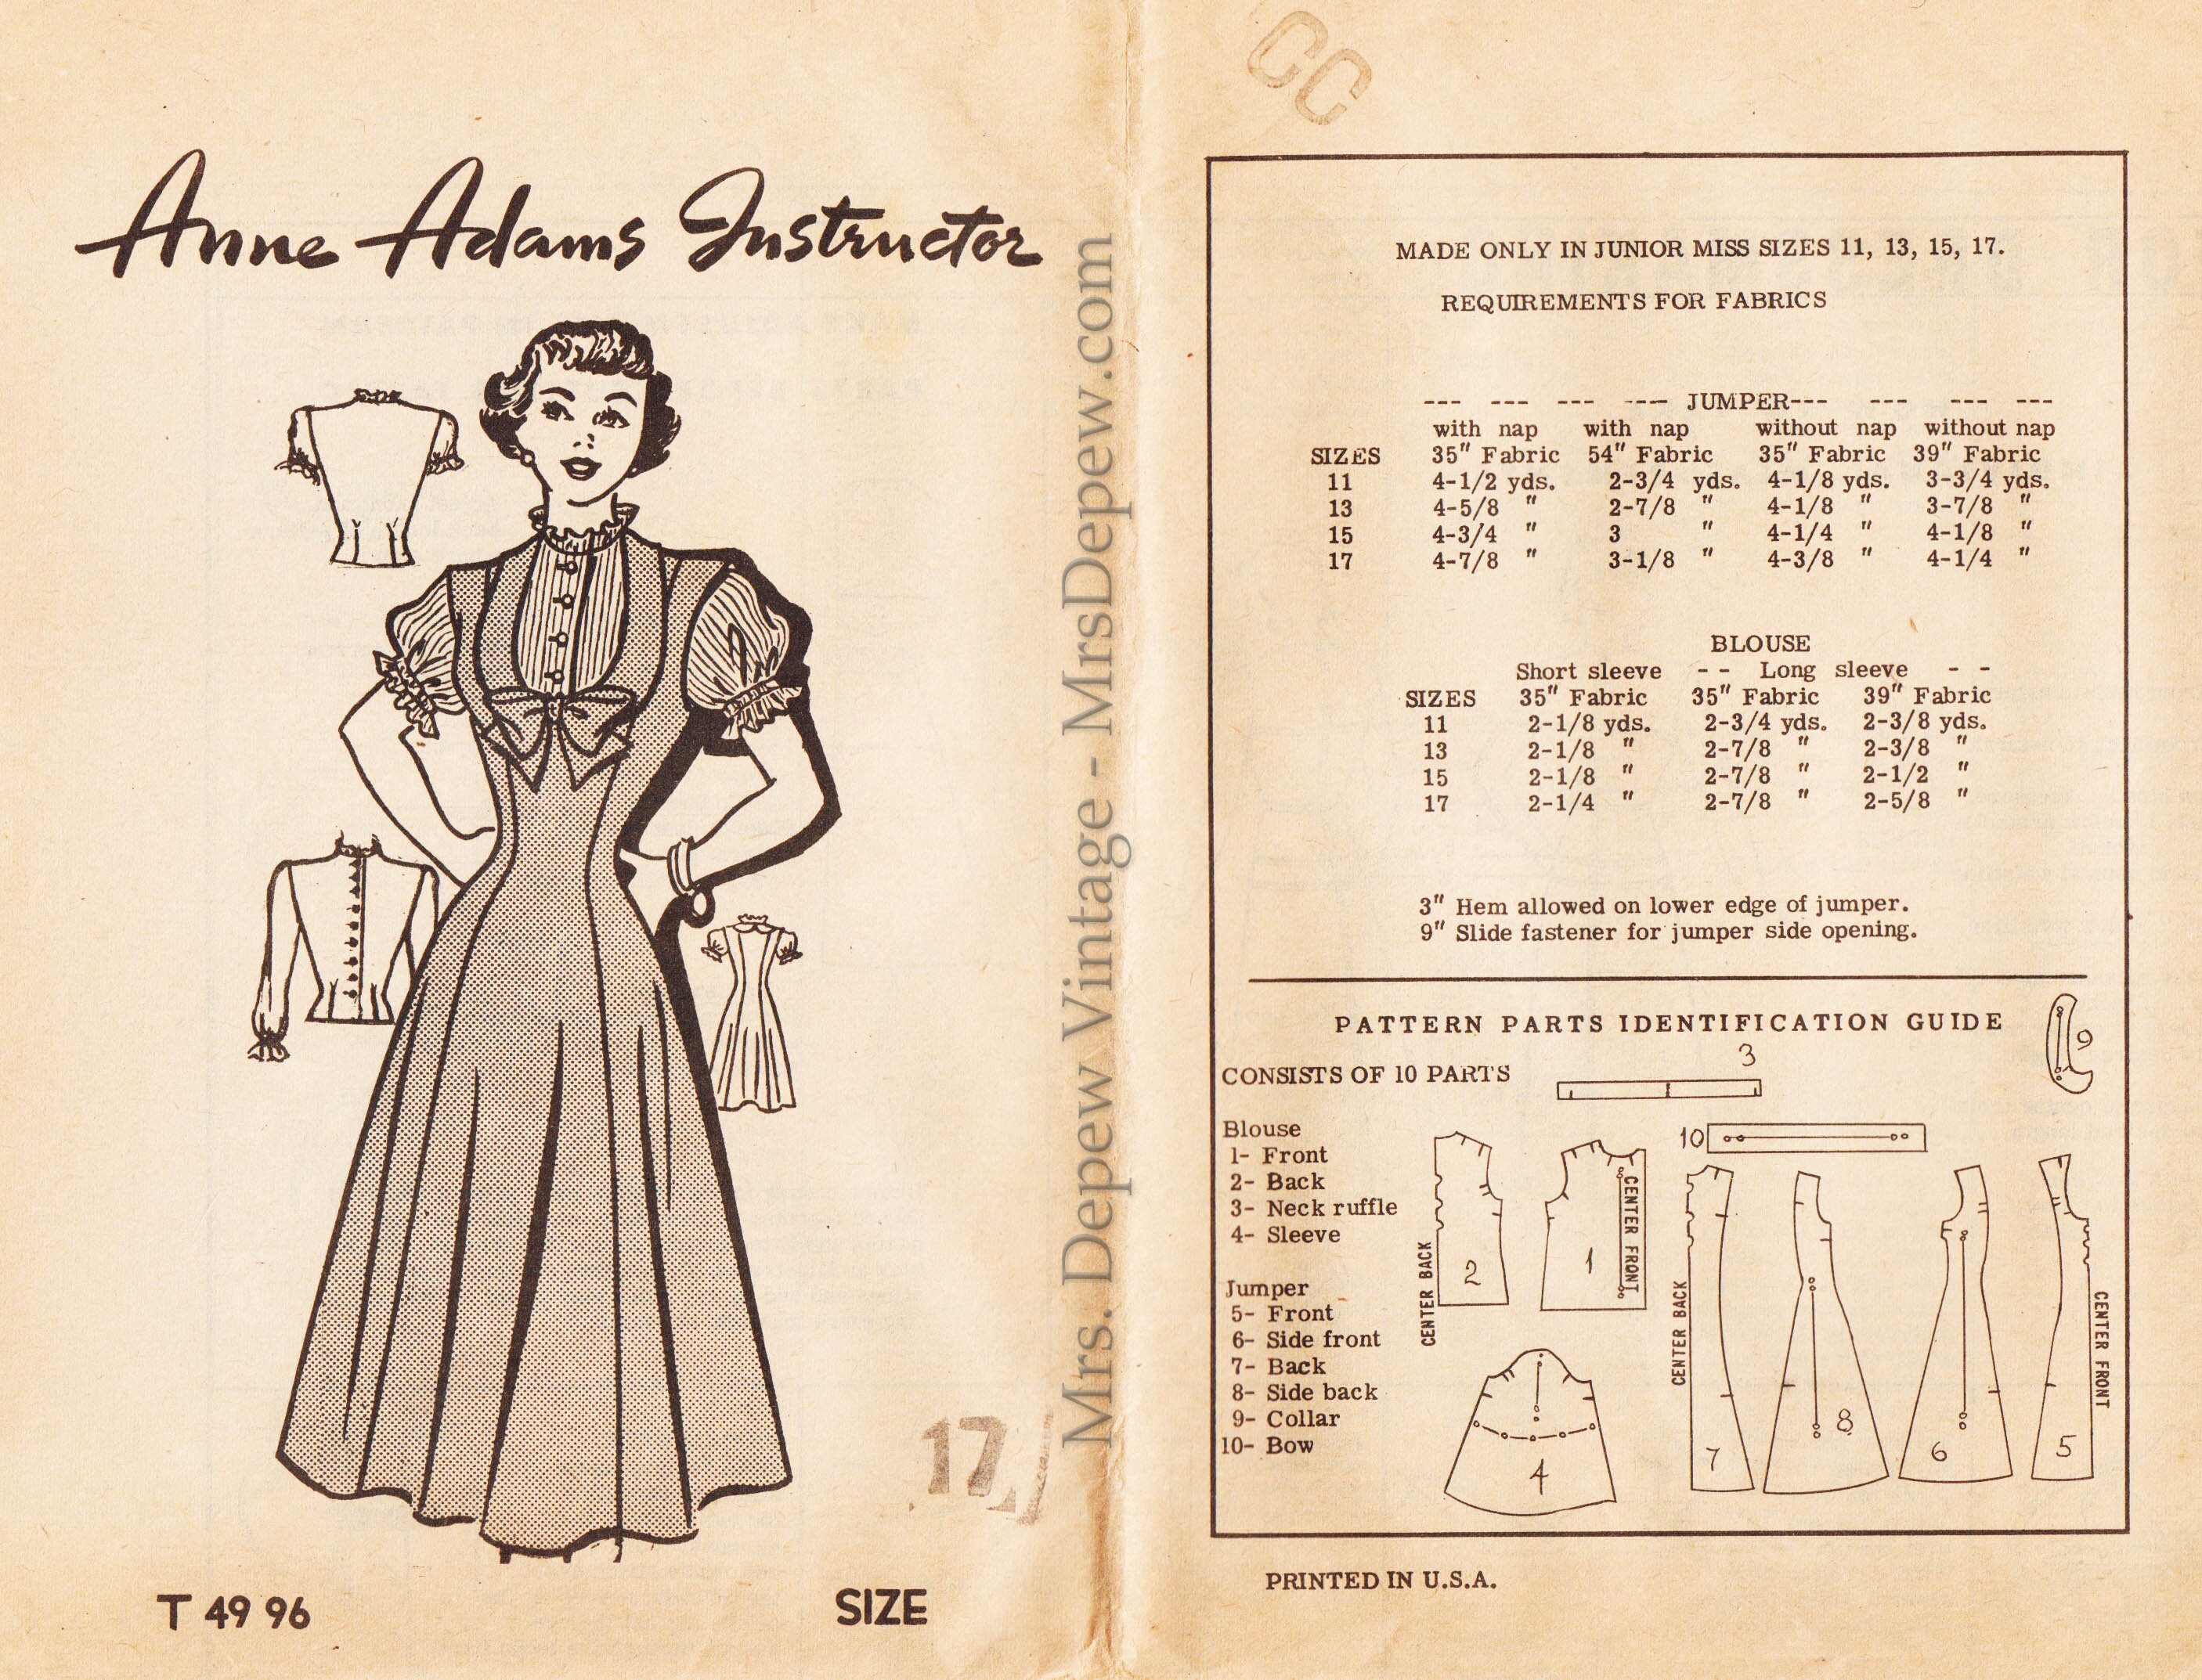 Free Pattern Grading E-book Included Vintage Sewing Pattern 1940s Dress McCall 5302 Size 38 Bust